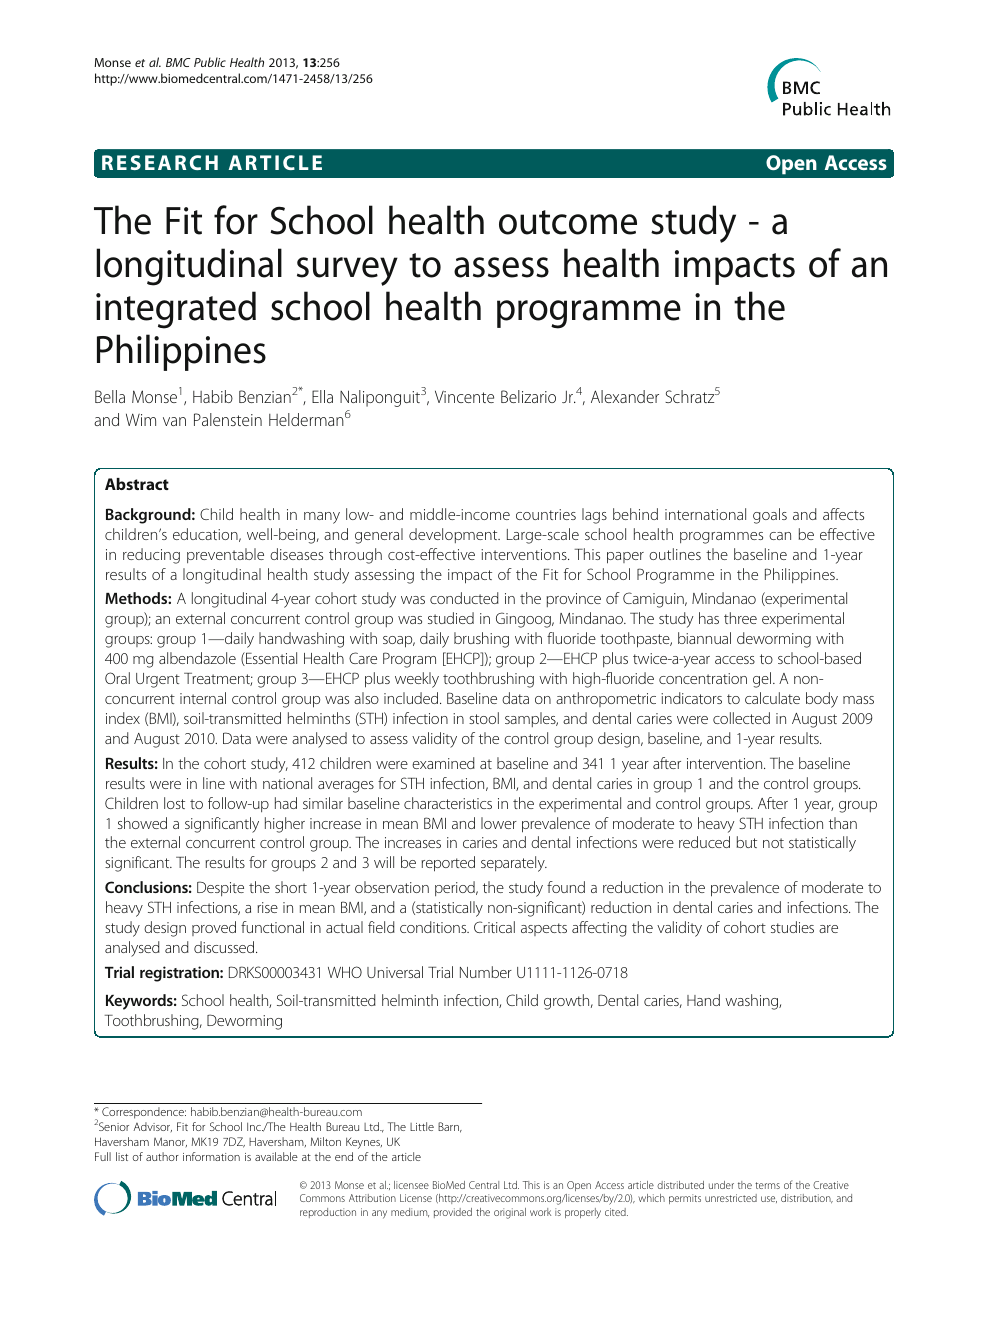 The Fit For School Health Outcome Study A Longitudinal Survey To